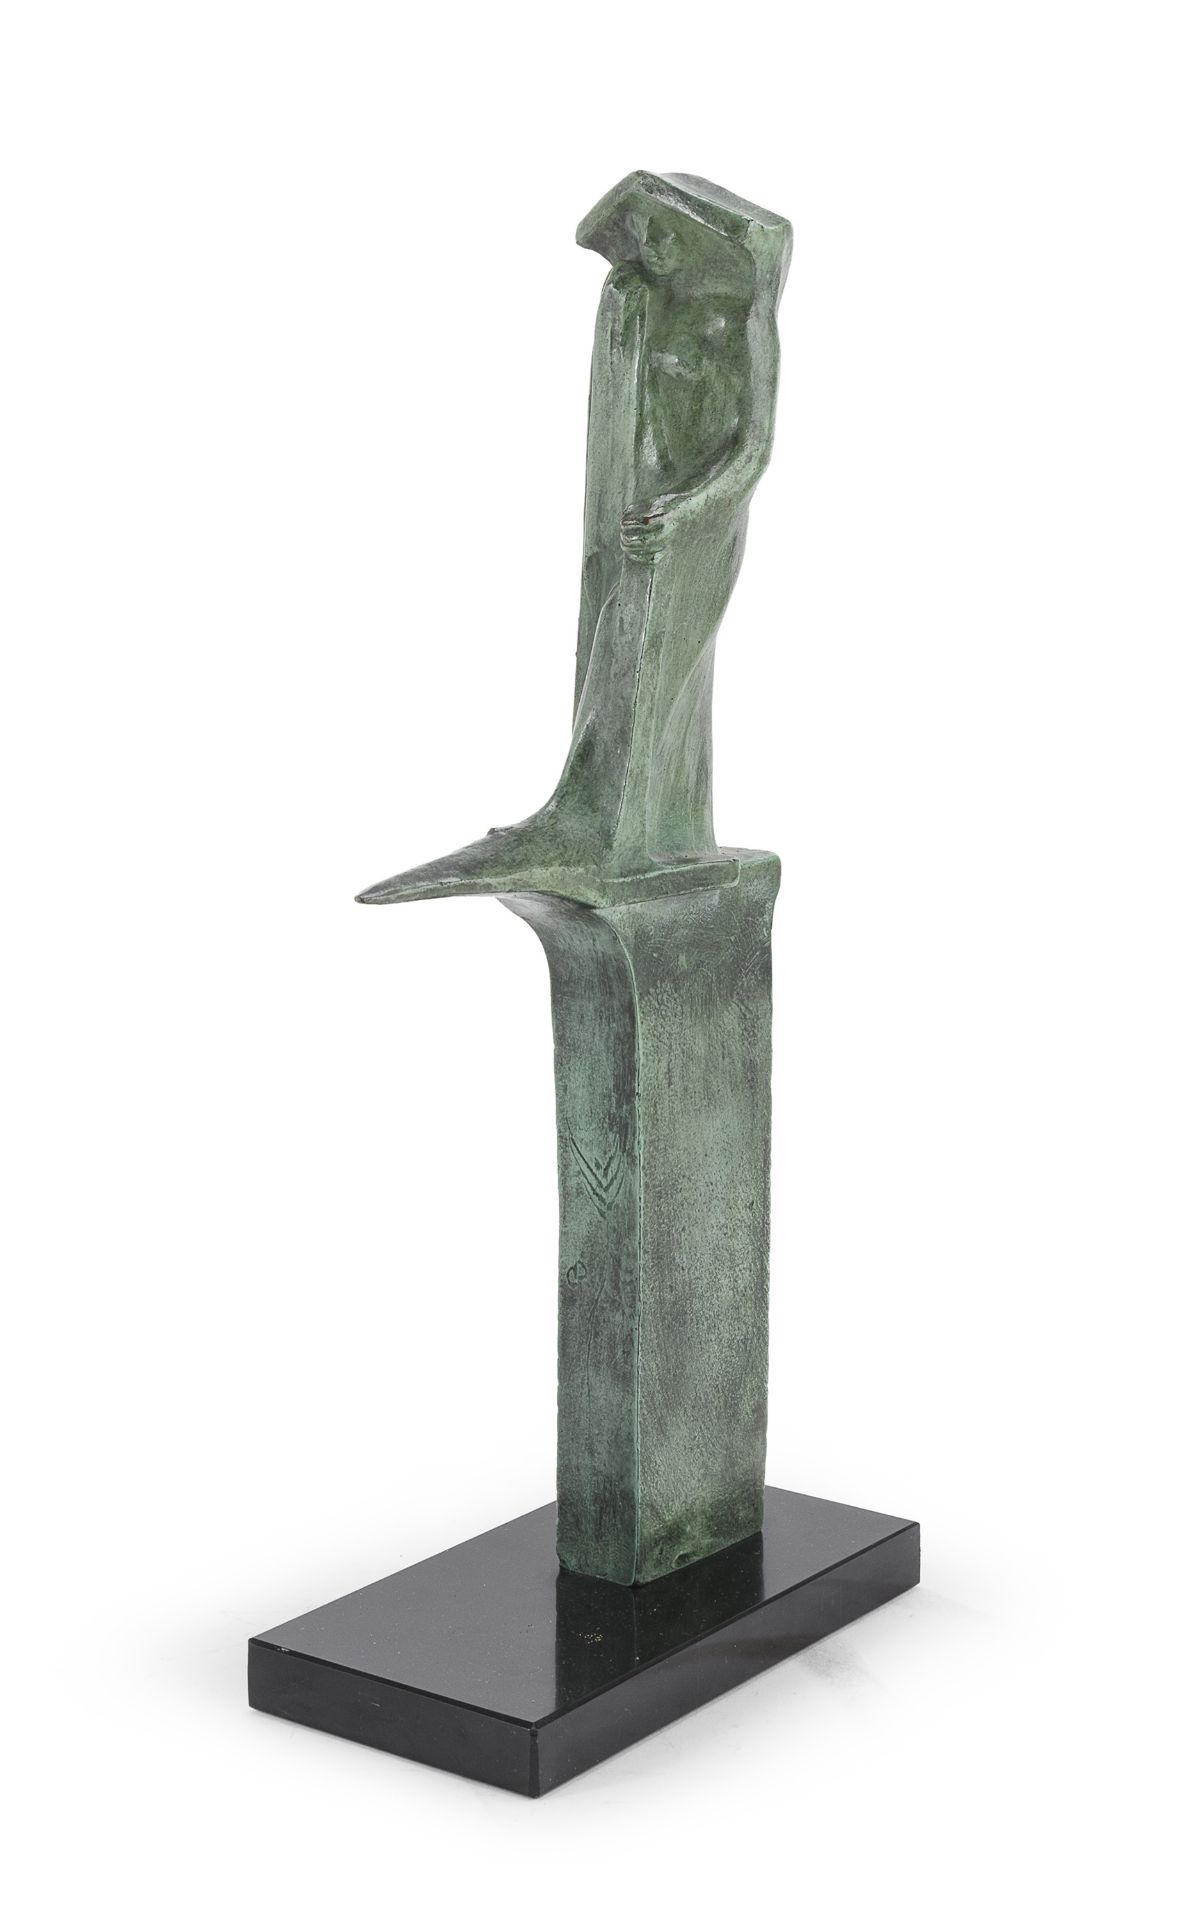 BRONZE SCULPTURE OF CYBELE BY DUILIO CAMBELLOTTI 1910/1992 - Image 3 of 3